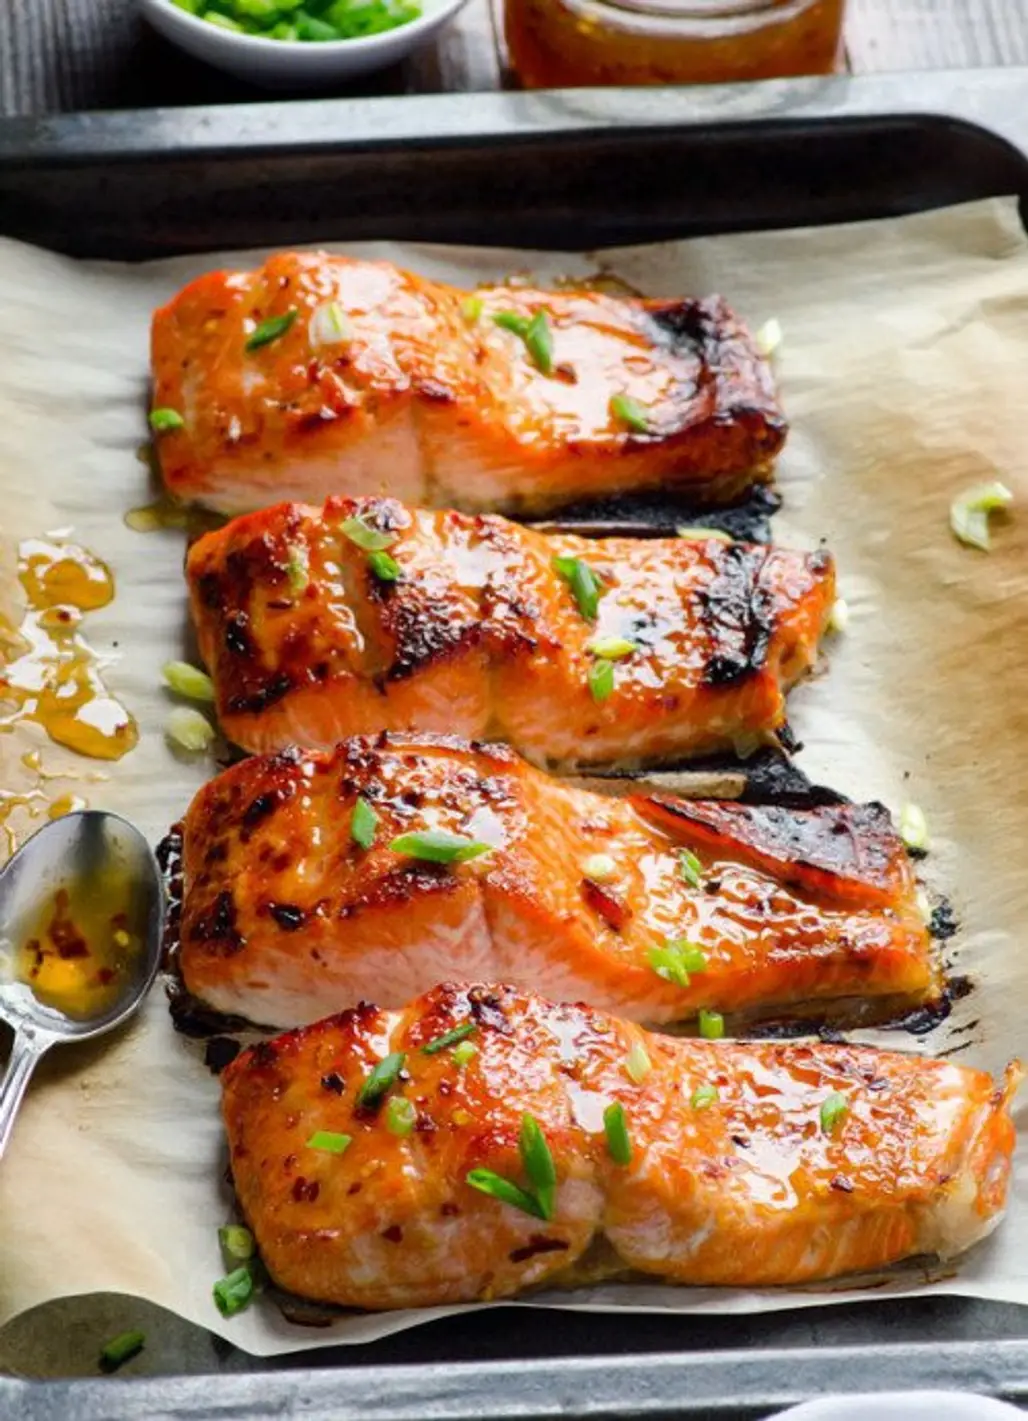 Baked Salmon Takes Only a Few Minutes to Cook While You Swap Stilettos for Sweat Pants